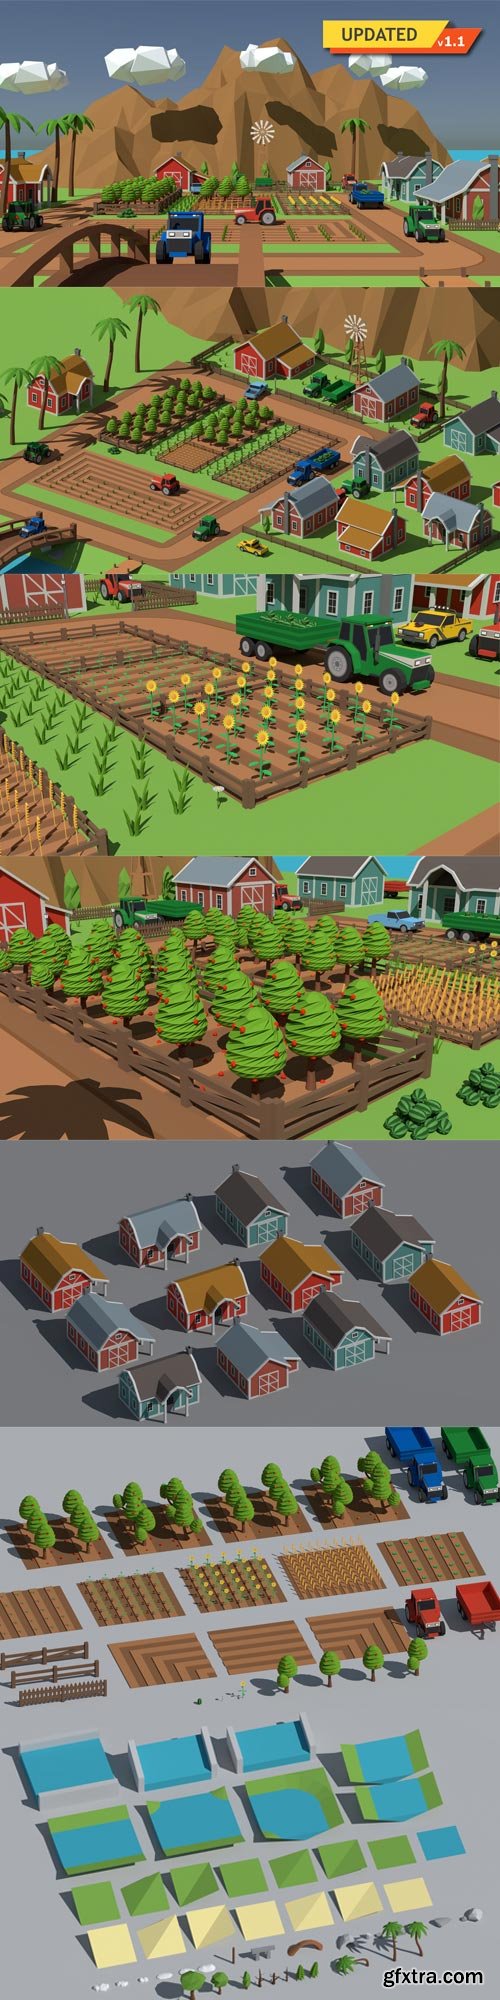 CgTrader - SimplePoly Farm - Low Poly Assets